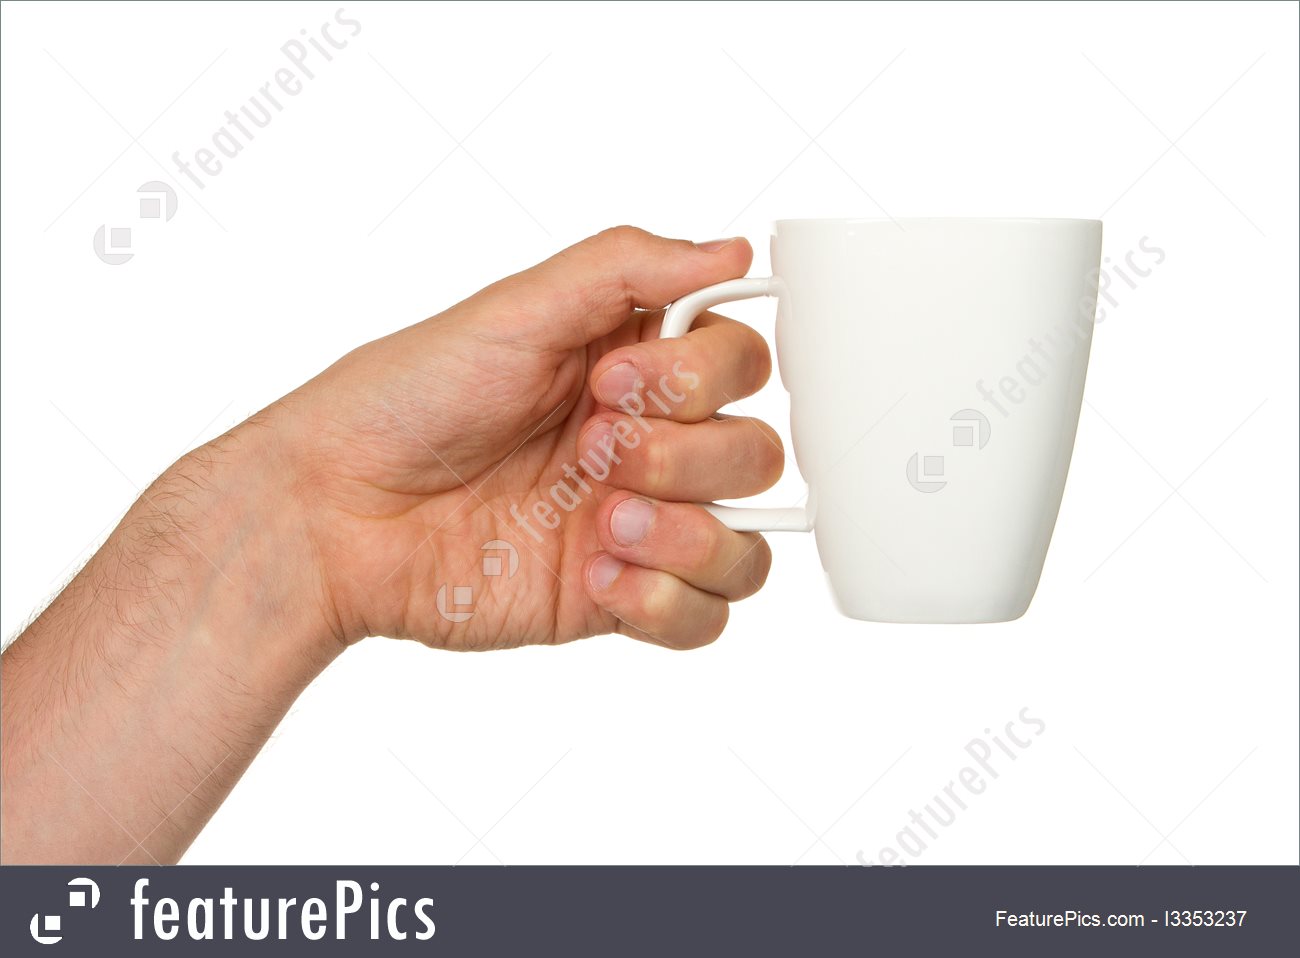 hand-holding-cup-stock-picture-2353237.jpg